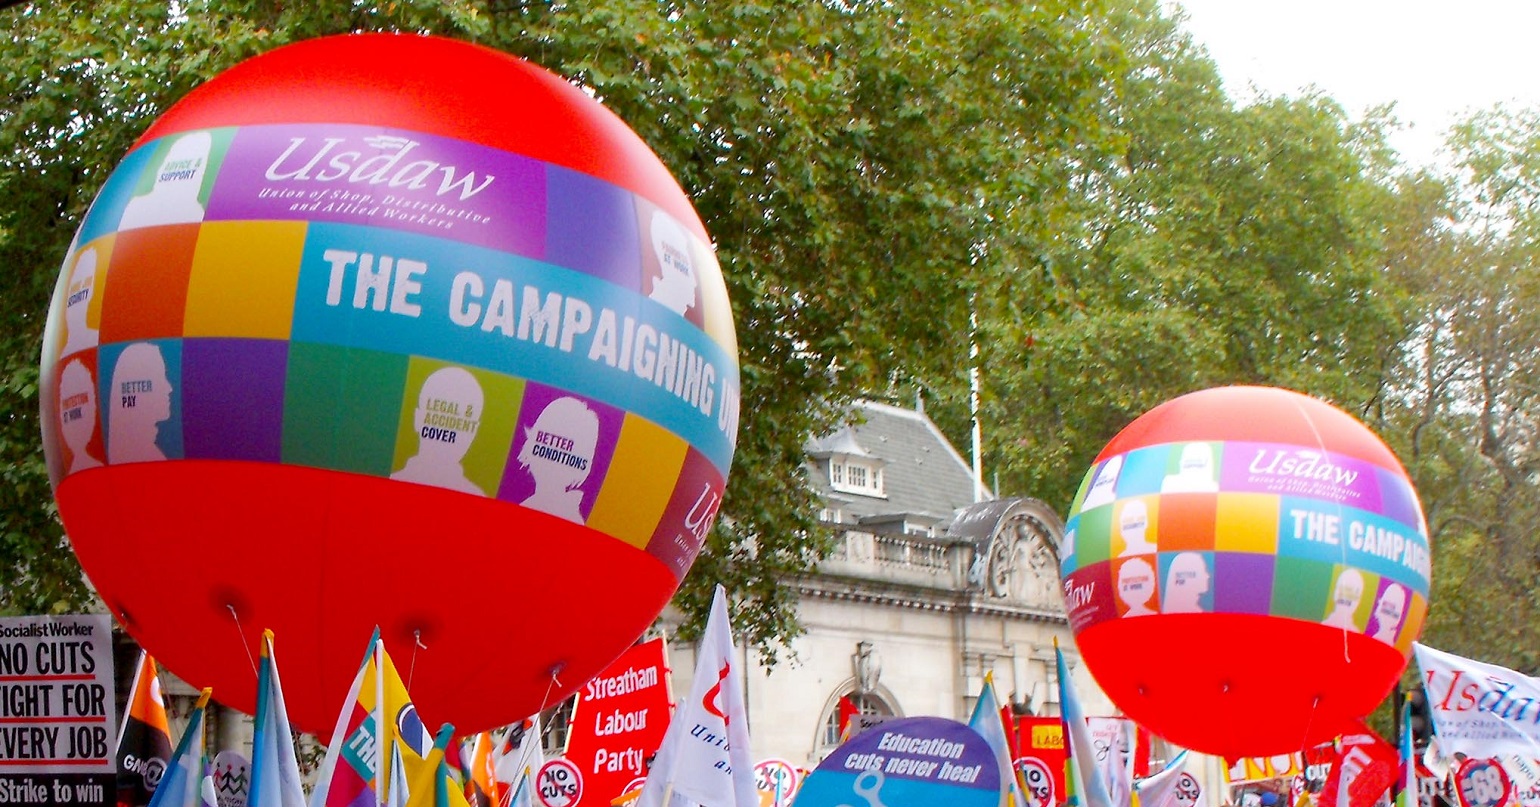 USDAW balloons on a demonstration